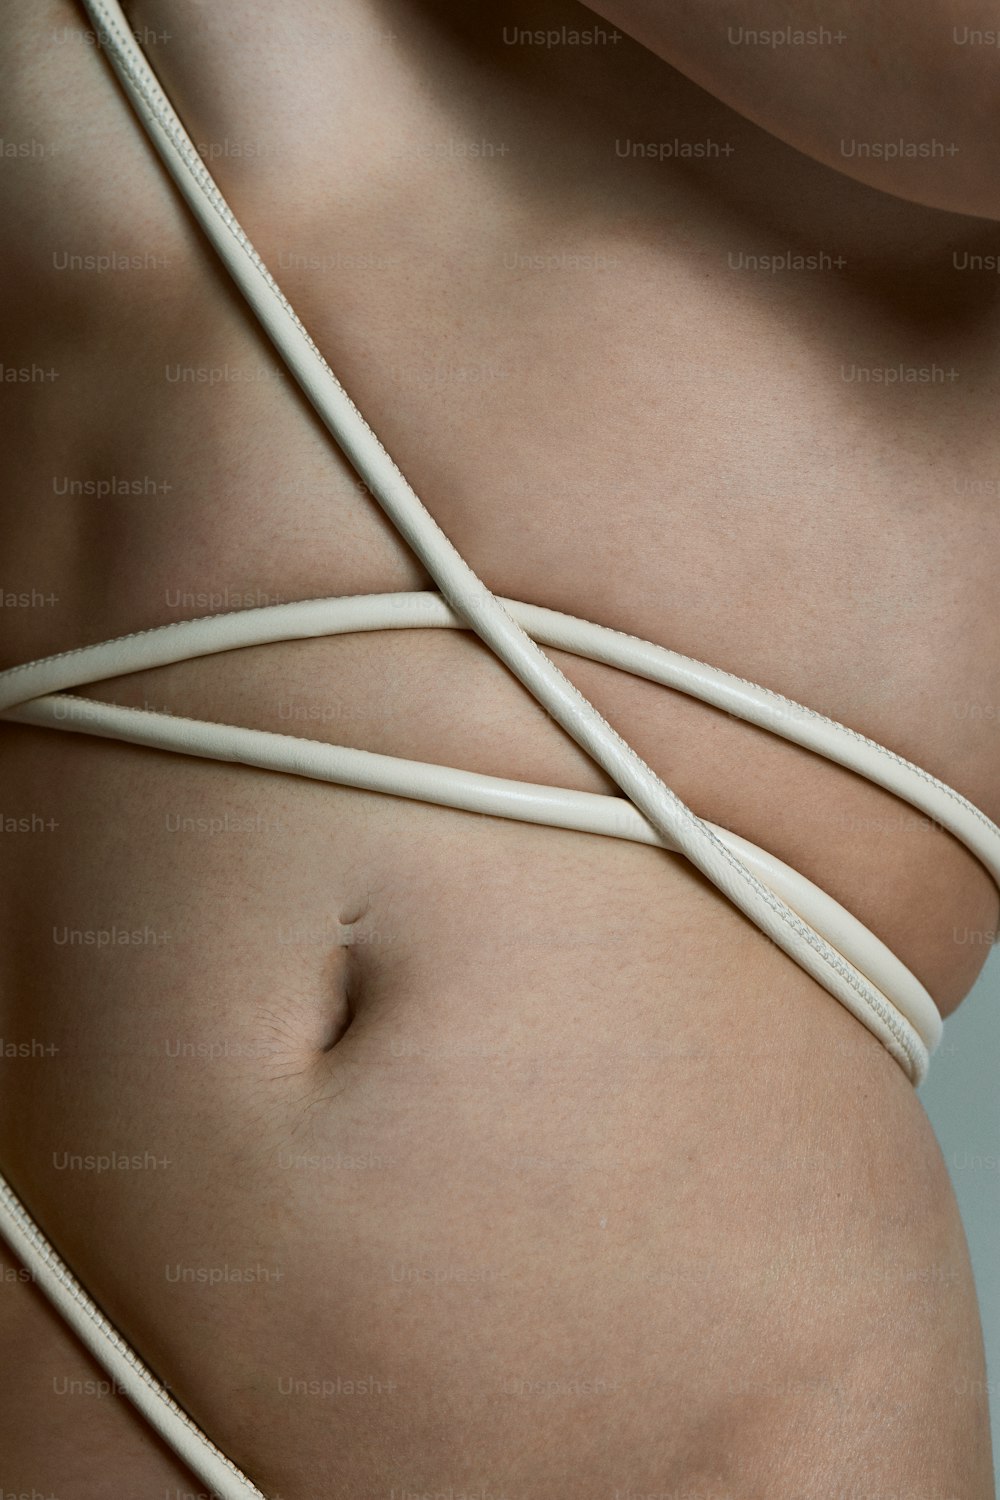 a close up of a woman's stomach with a rope wrapped around it